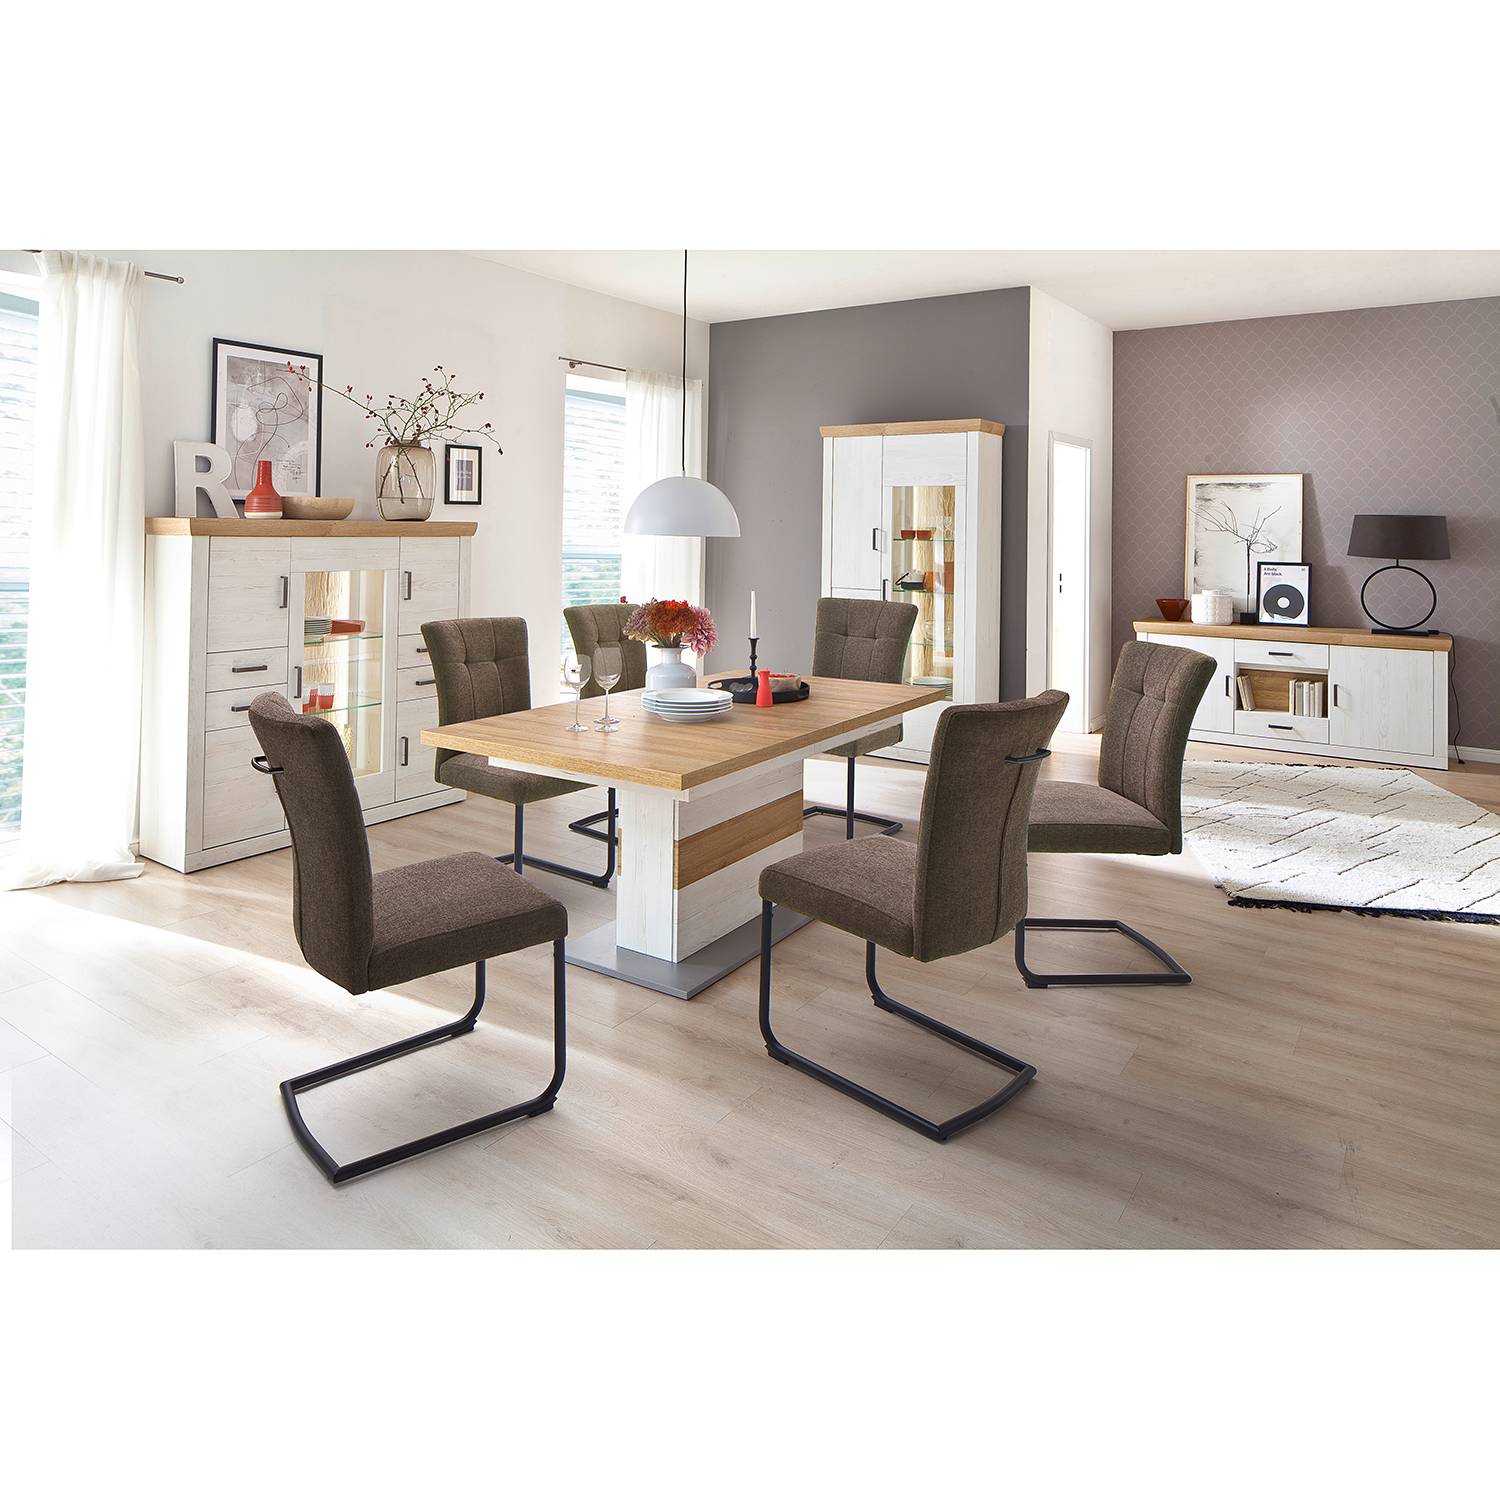 Table Marnay (extensible)